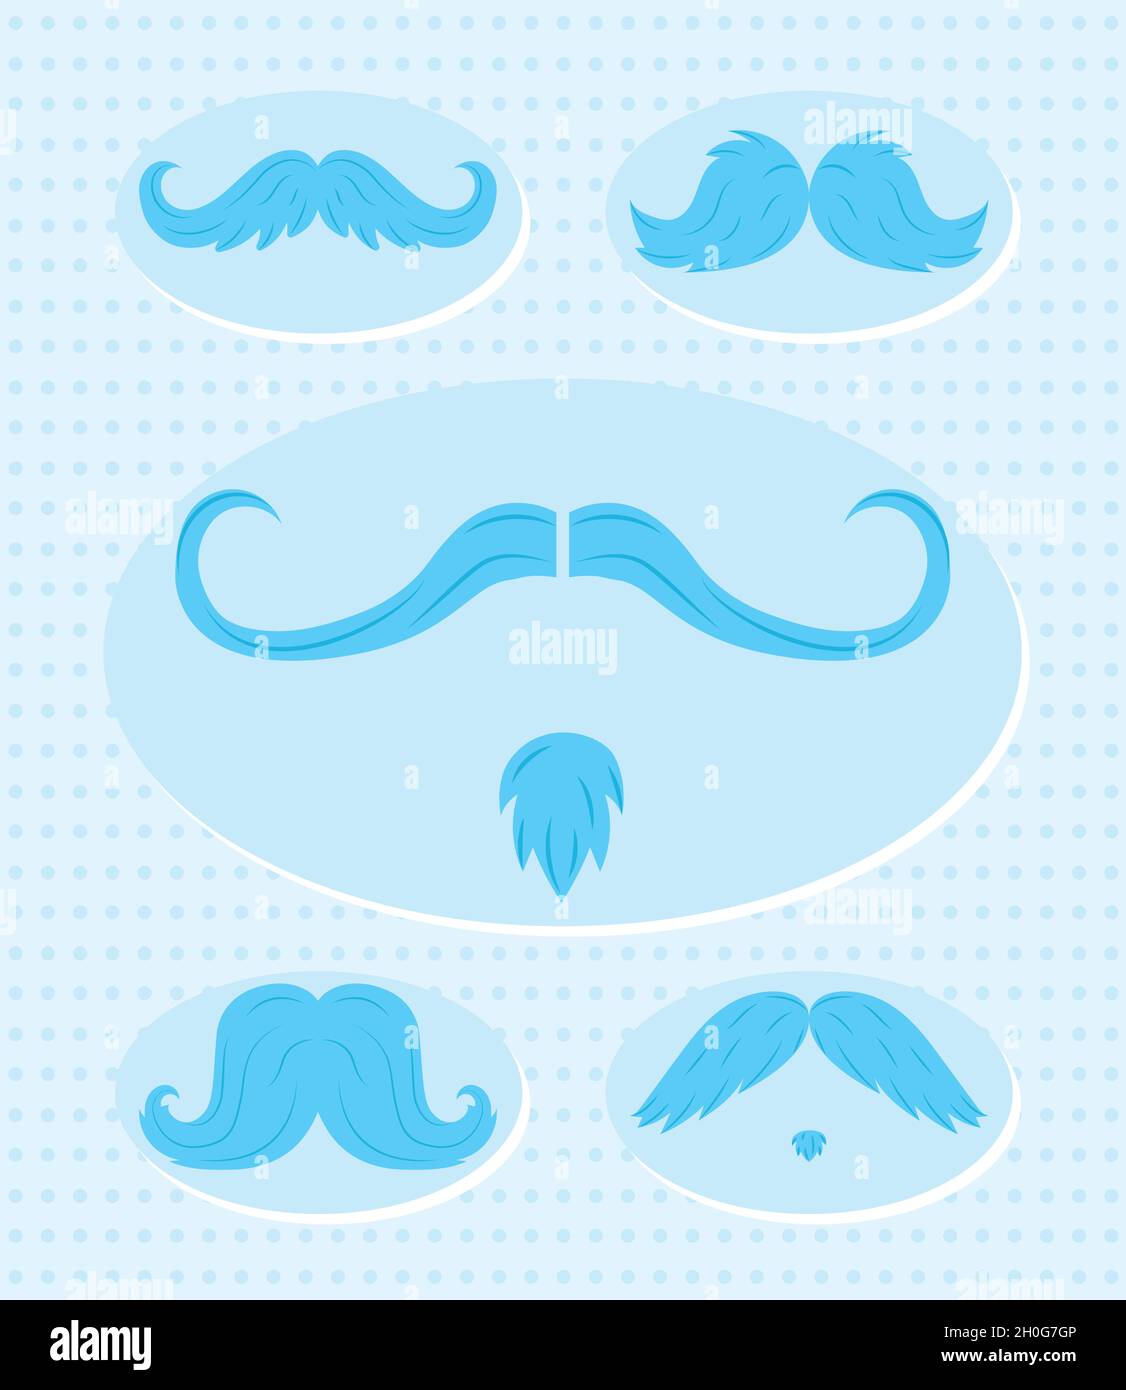 moustache styles icon collection design Stock Vector